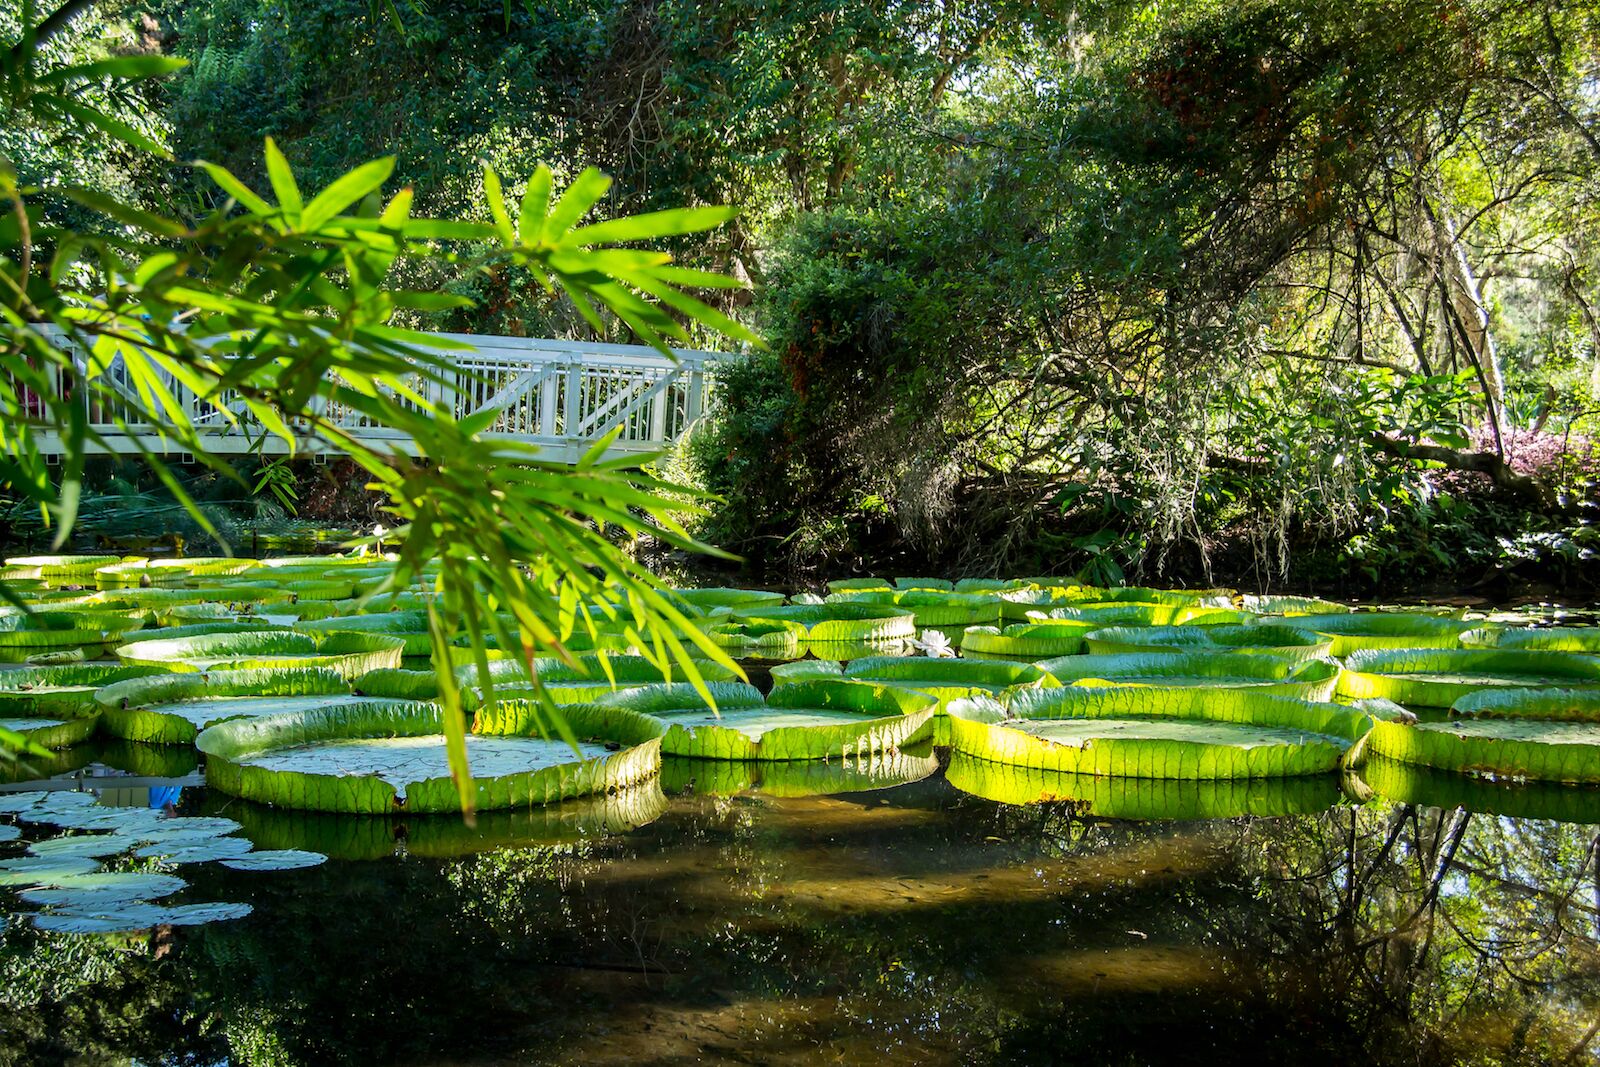 Victoria lily pads in a garden